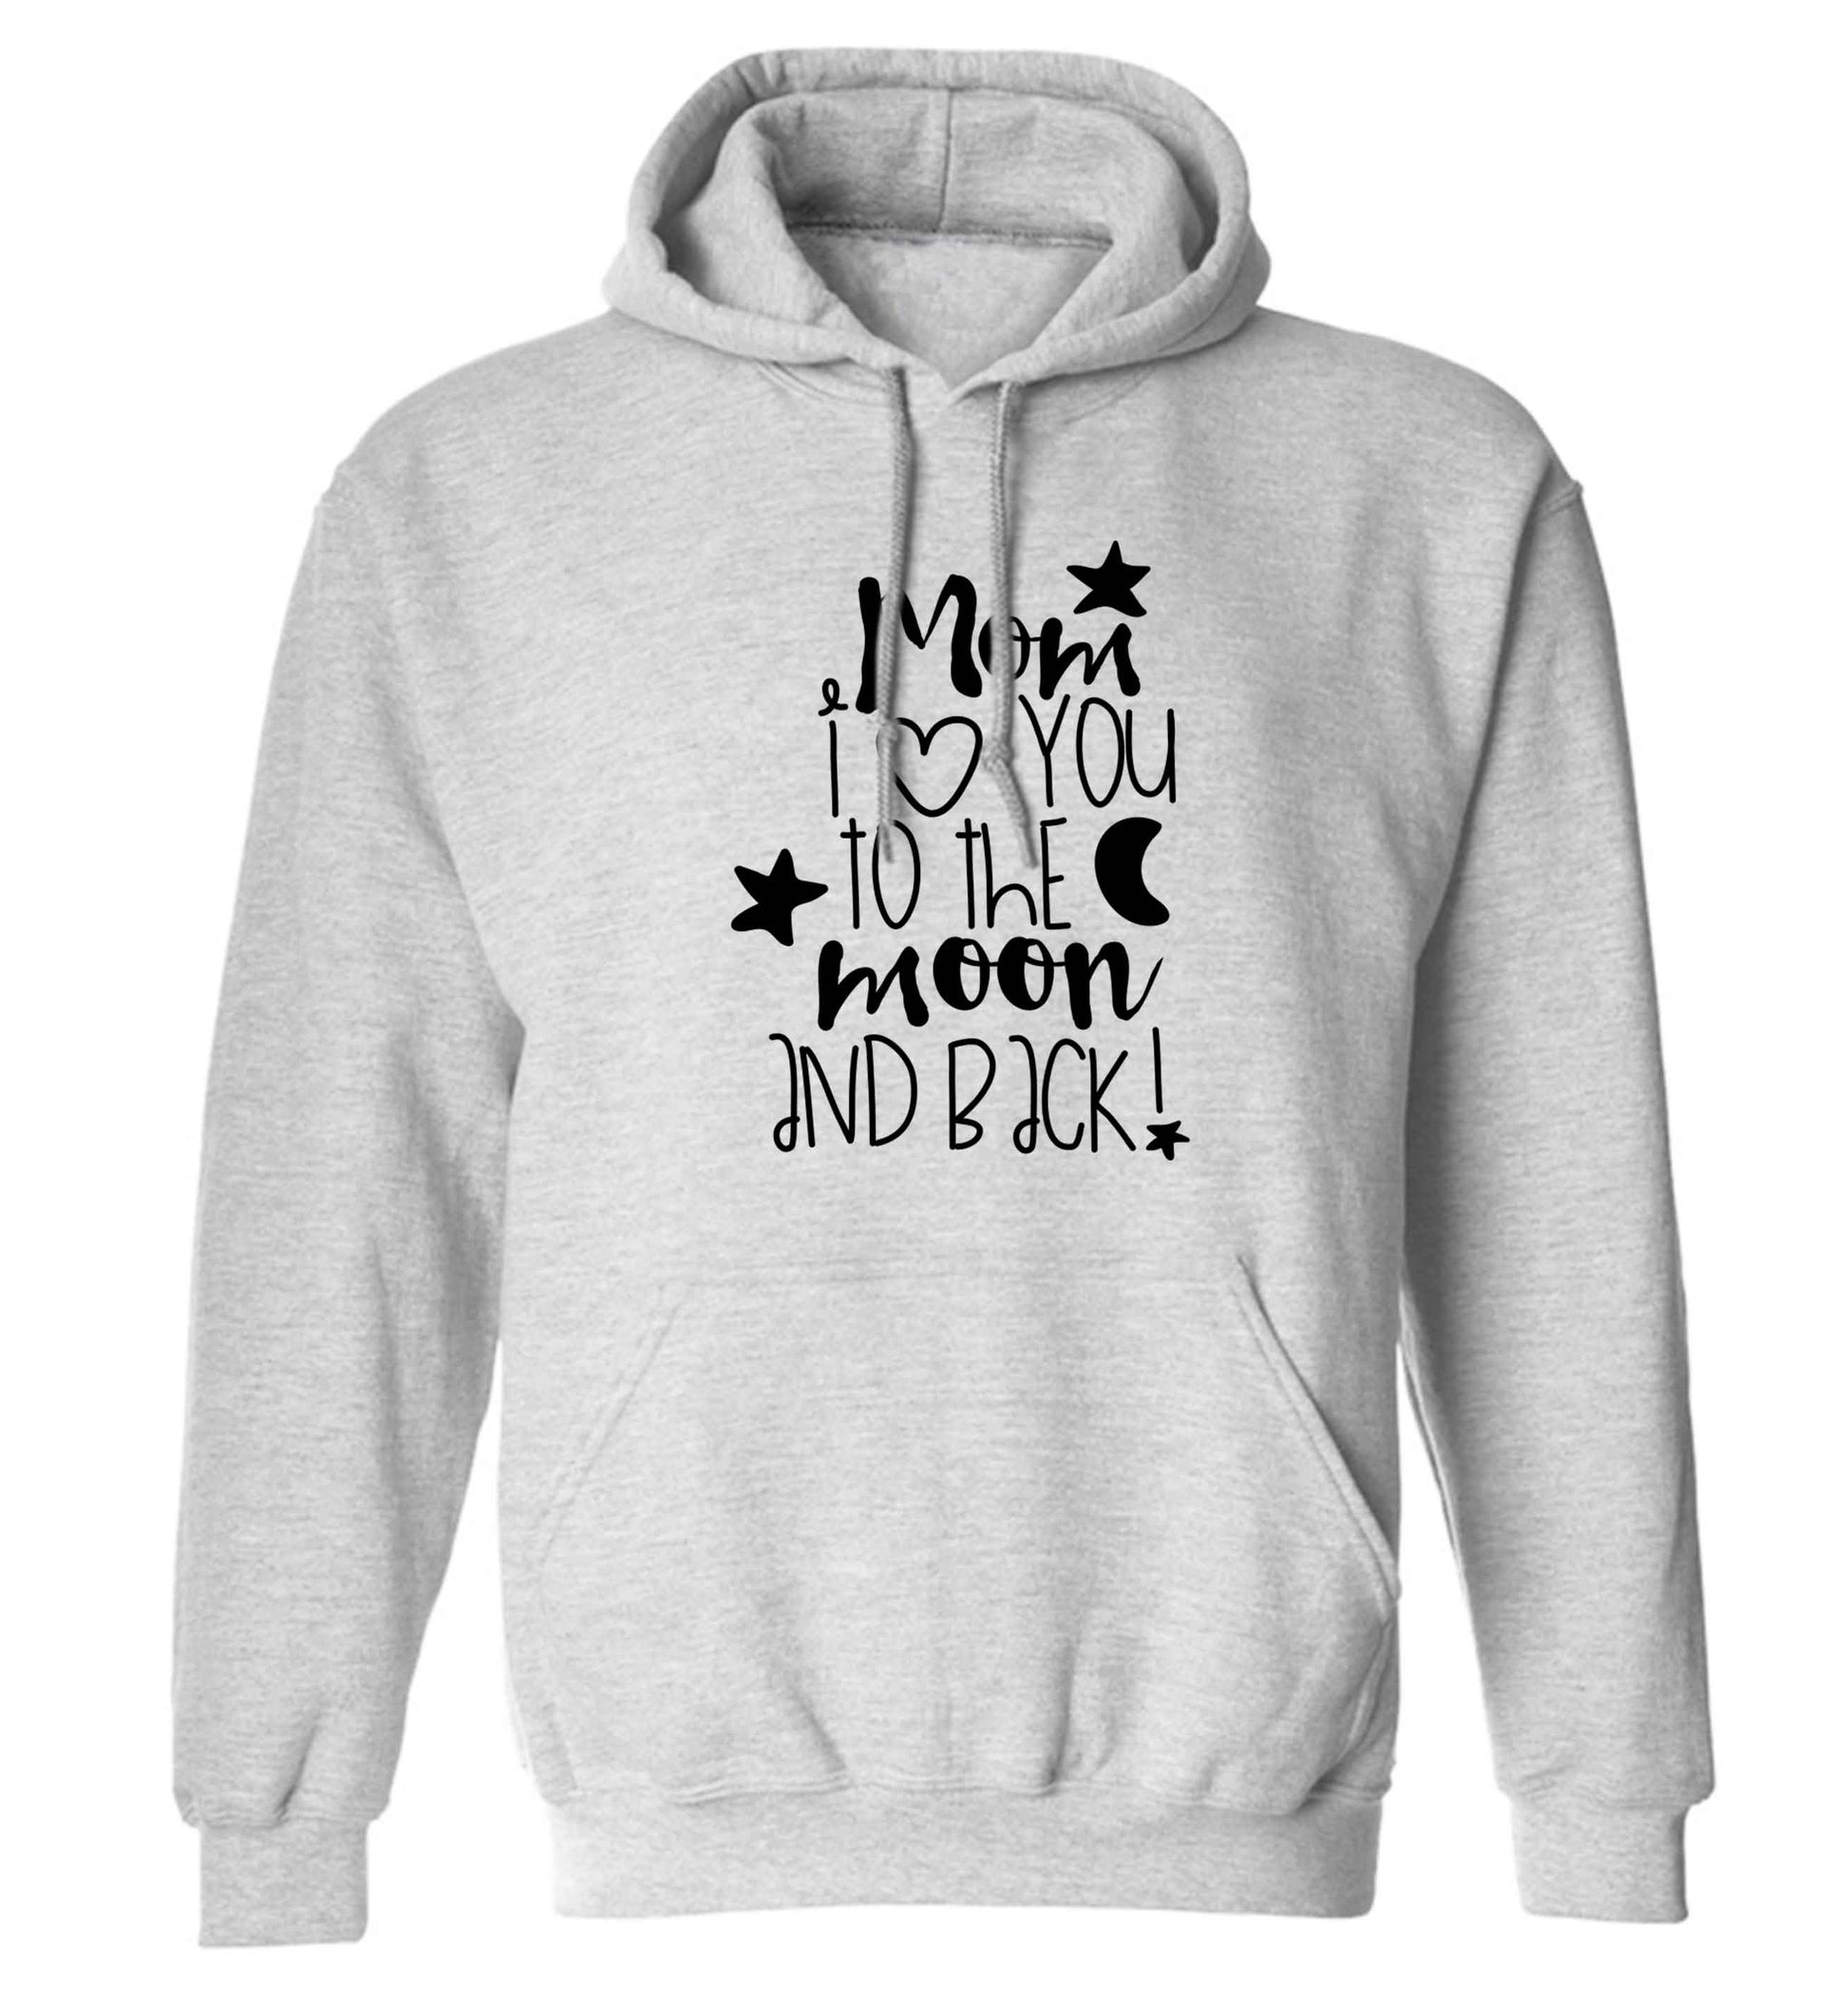 Mom I love you to the moon and back adults unisex grey hoodie 2XL